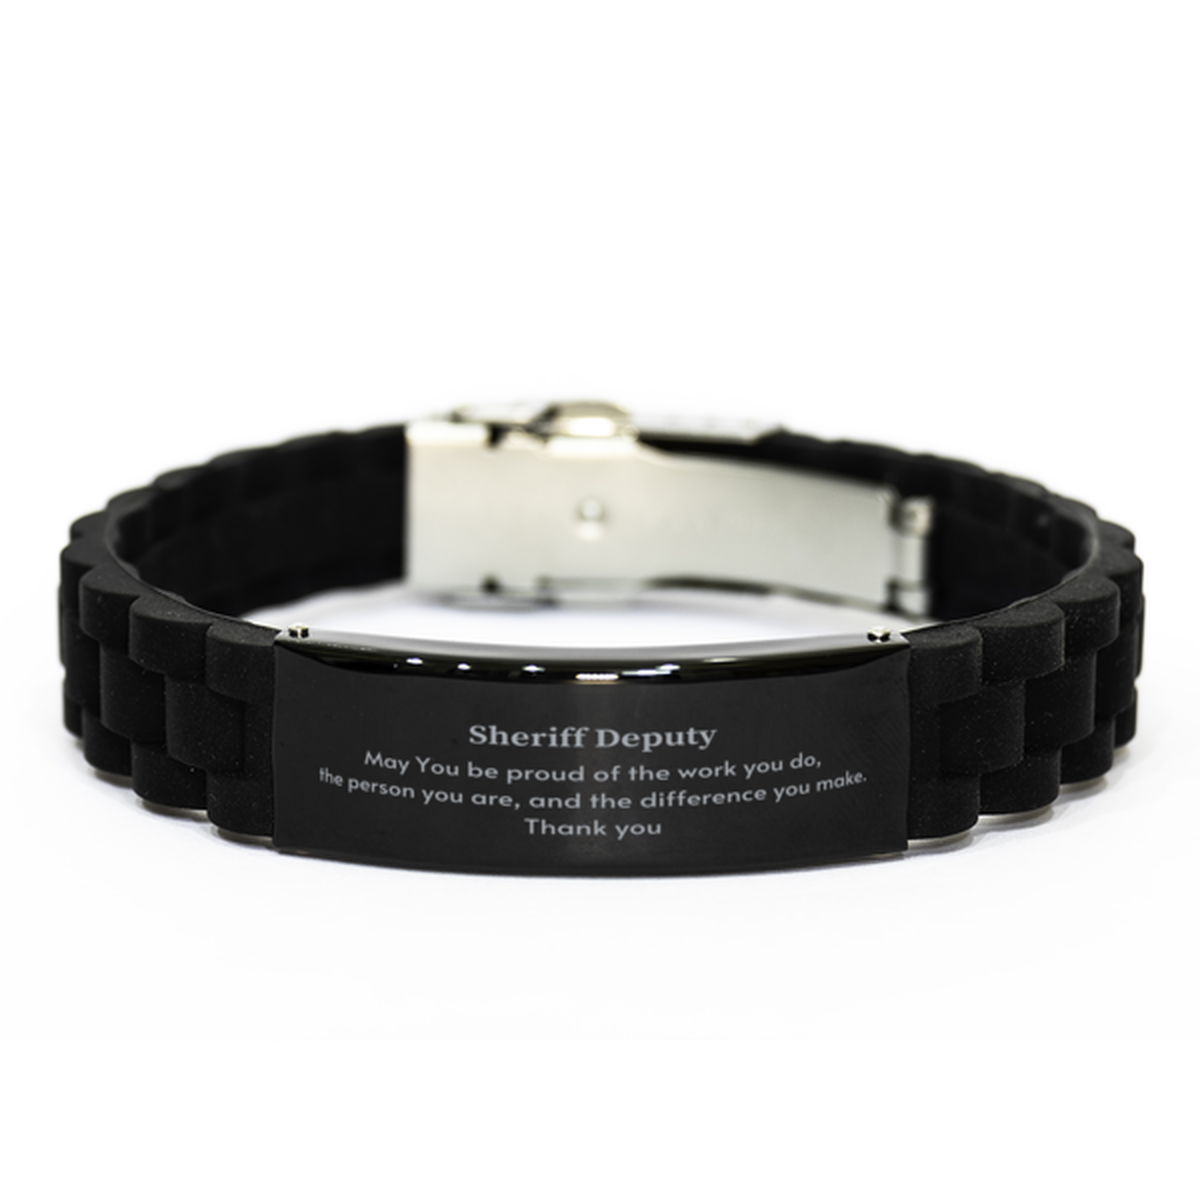 Heartwarming Black Glidelock Clasp Bracelet Retirement Coworkers Gifts for Sheriff Deputy, Sheriff Deputy May You be proud of the work you do, the person you are Gifts for Boss Men Women Friends